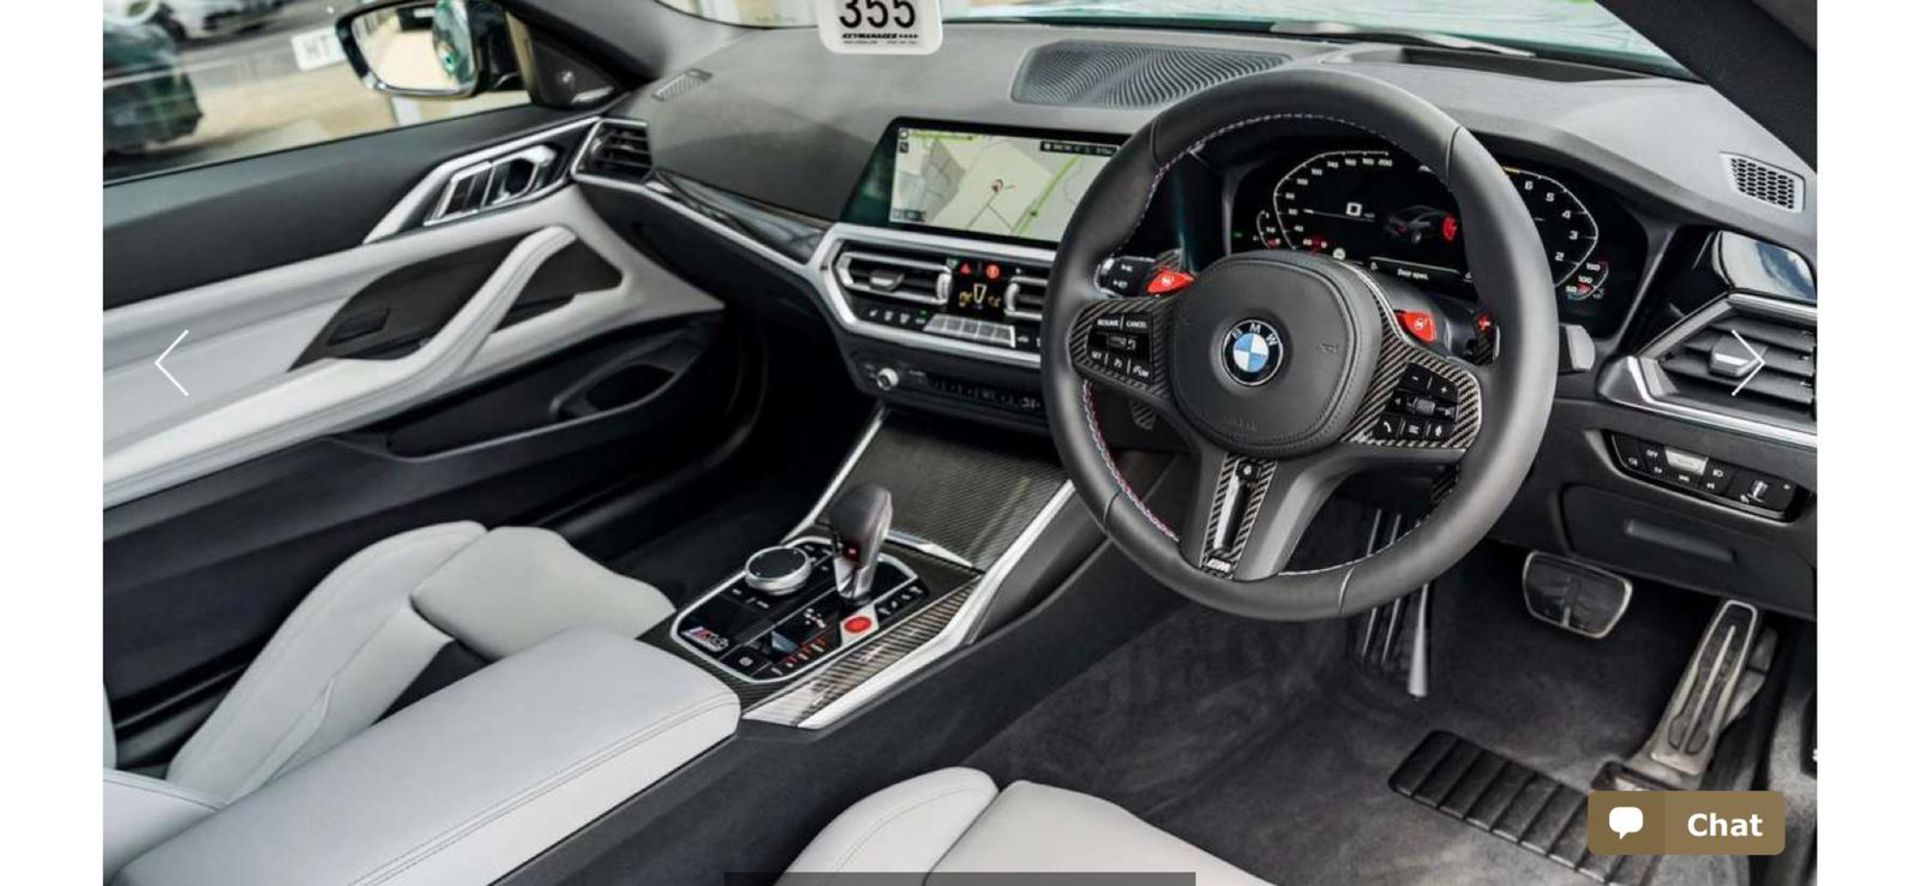 2021 BMW 4 SERIES M4 COMPETITION 3.0 2 DOOR COUPE, VERY HIGH SPEC, ONLY 1800 MILES *NO VAT* - Image 8 of 11